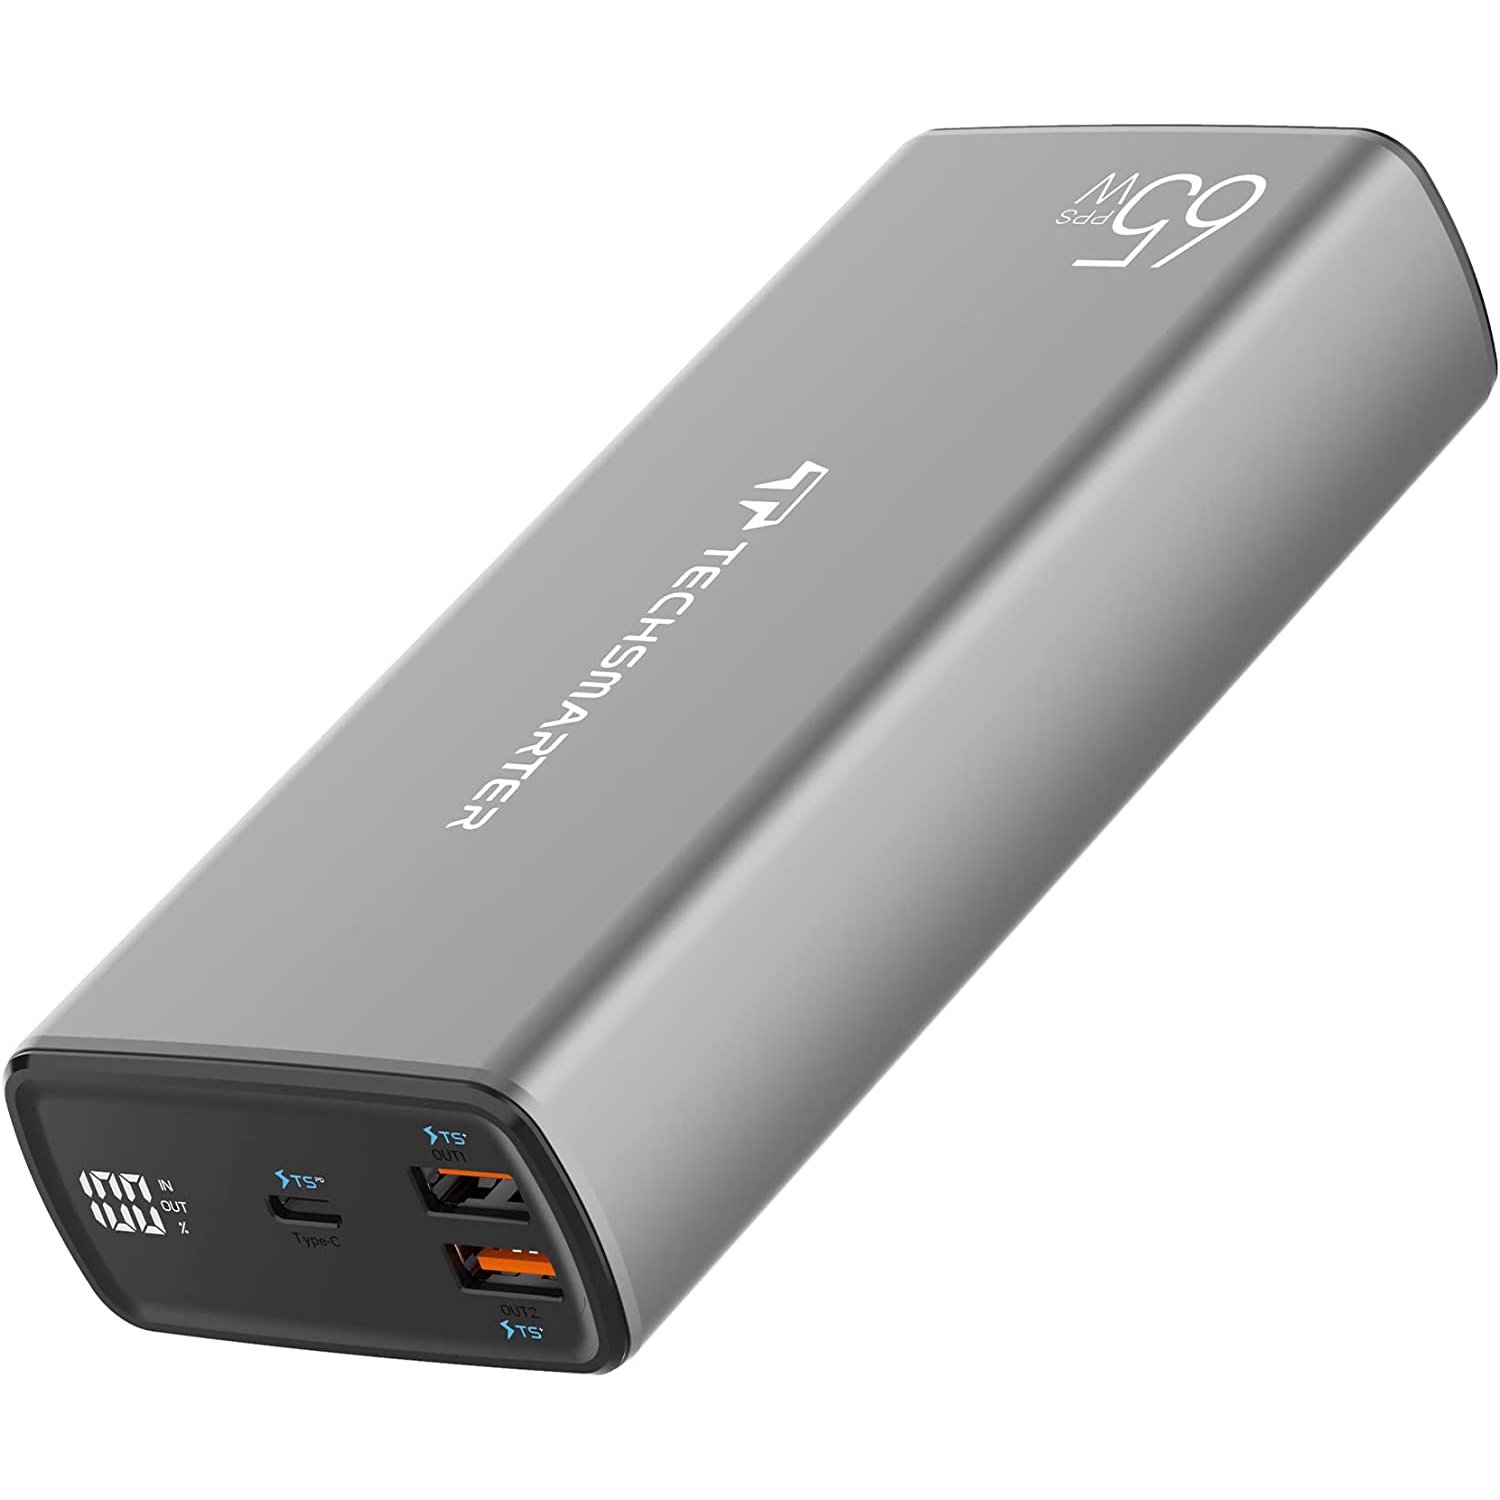 Techsmarter 30000mah 65W USB-C Laptop Power Bank with Samsung Super Fast Charging, Portable Charger Compatible with iPhone, Samsung Galaxy, Androids, iPad, MacBook Air/Pro